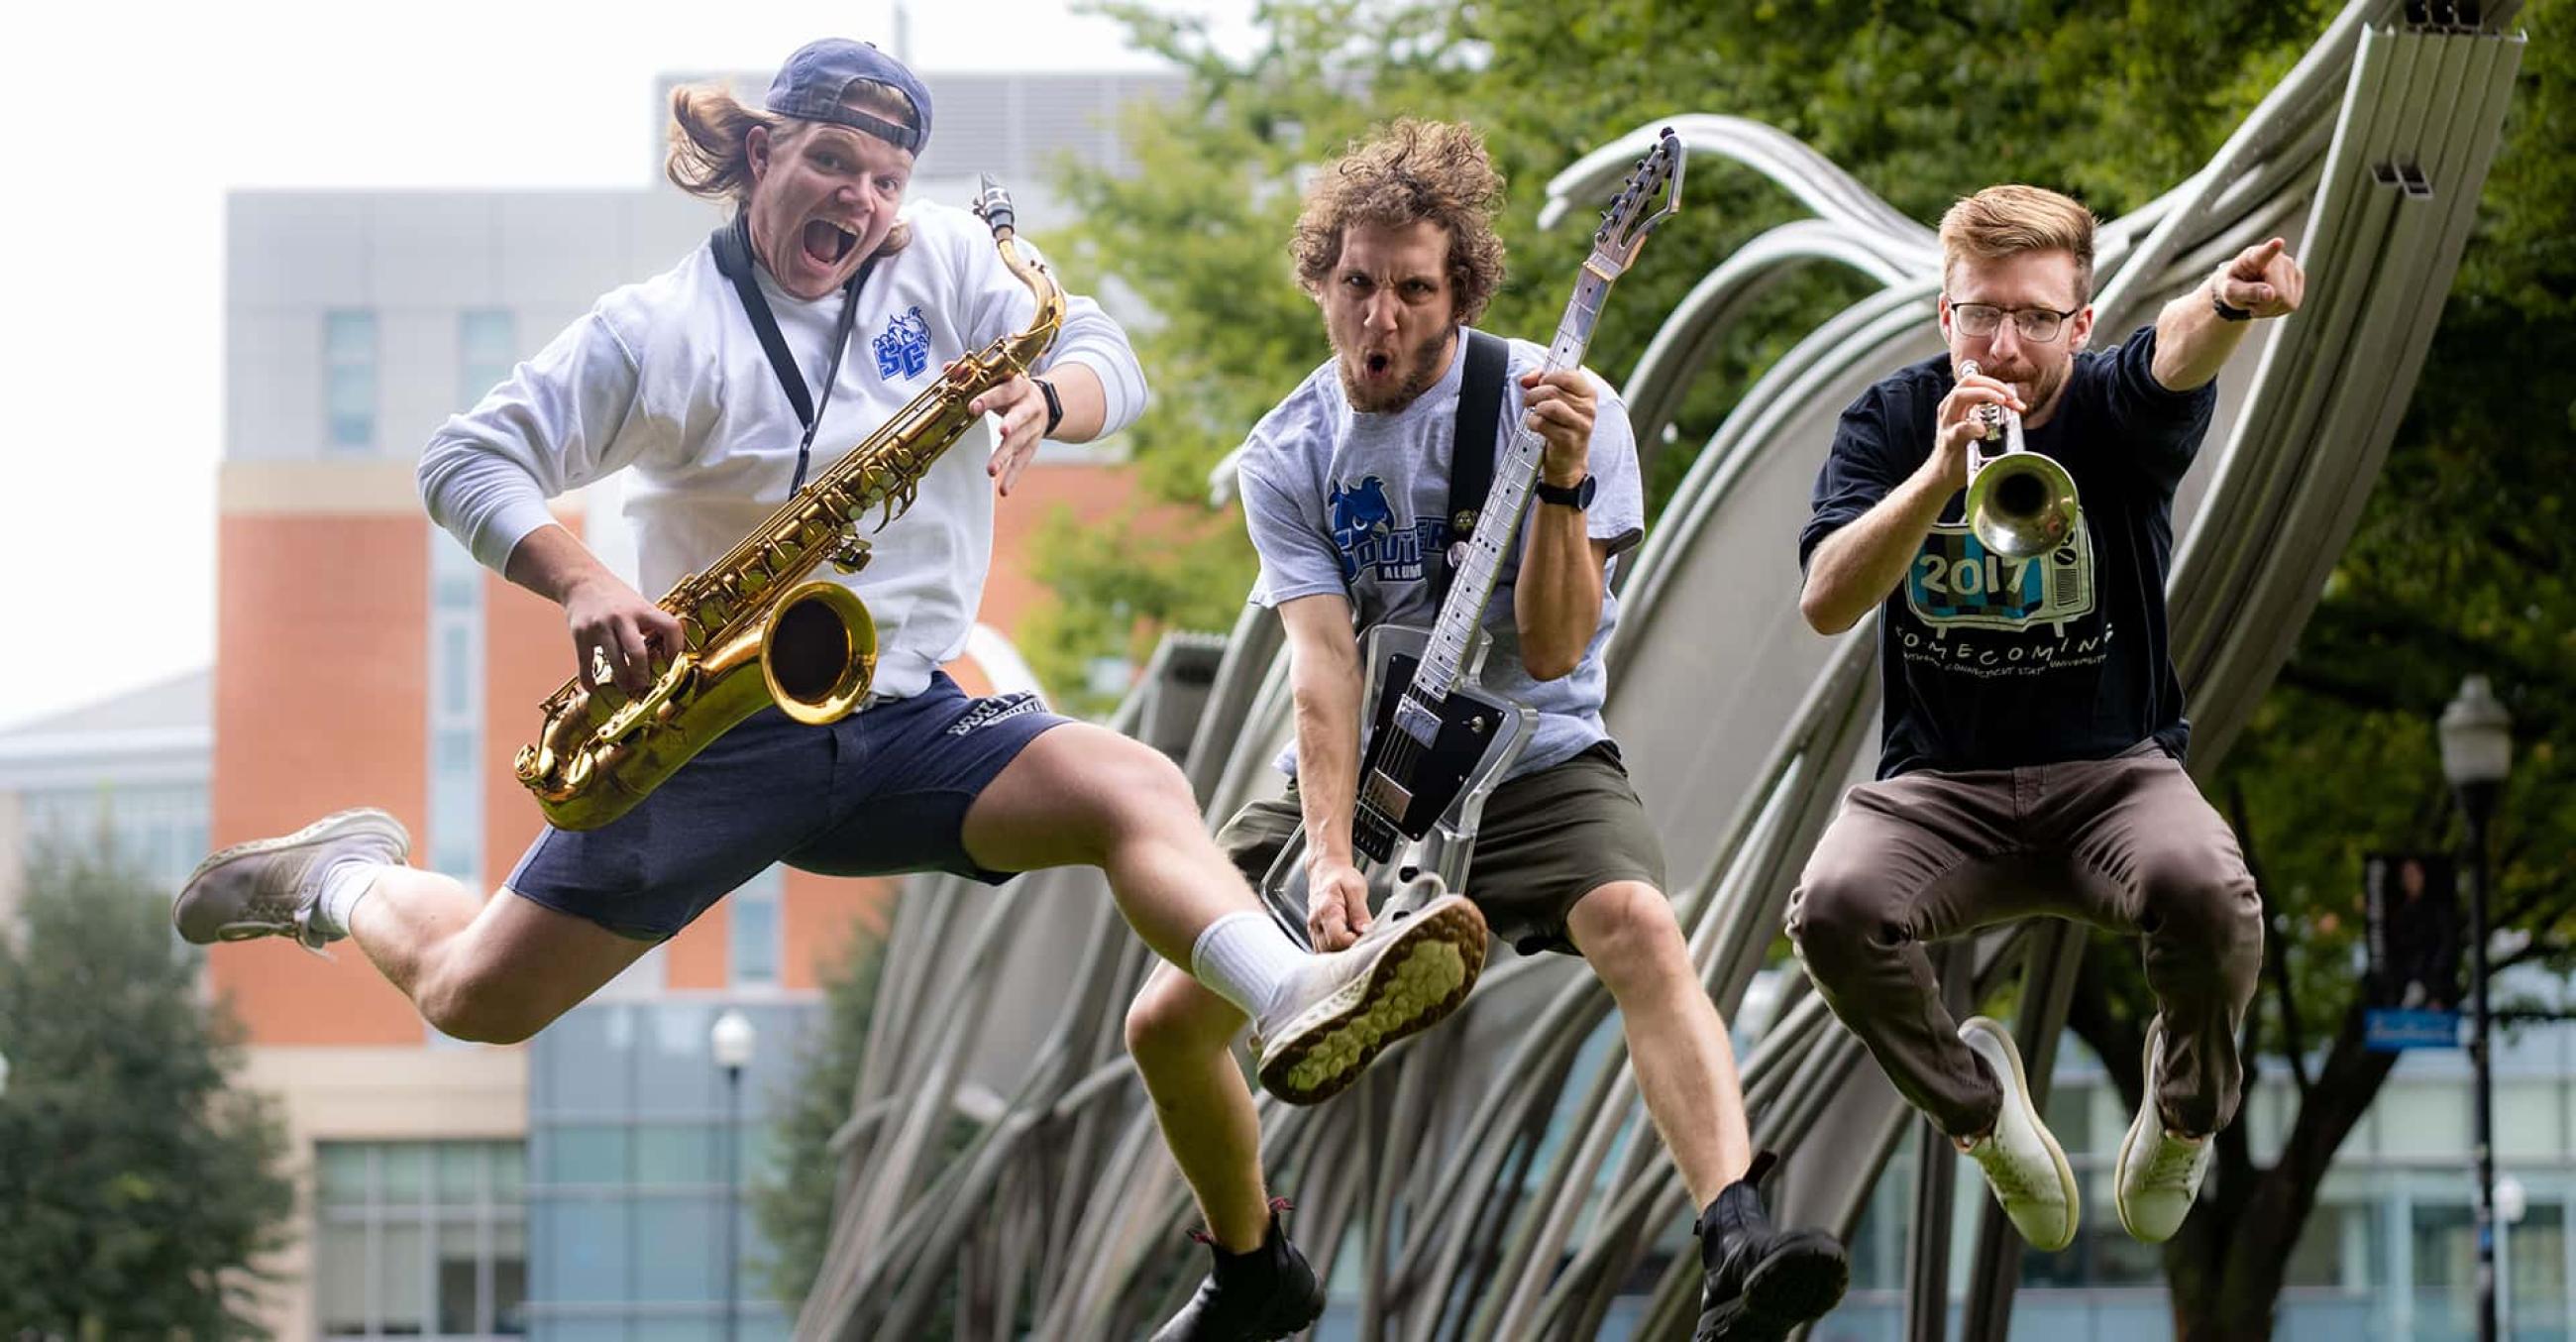 Keegan Smith, ‘22; William Durant, ’19; and Tom Pelton, ’20, members of the band Julai and the Seratones, jump in the air while holding their instruments